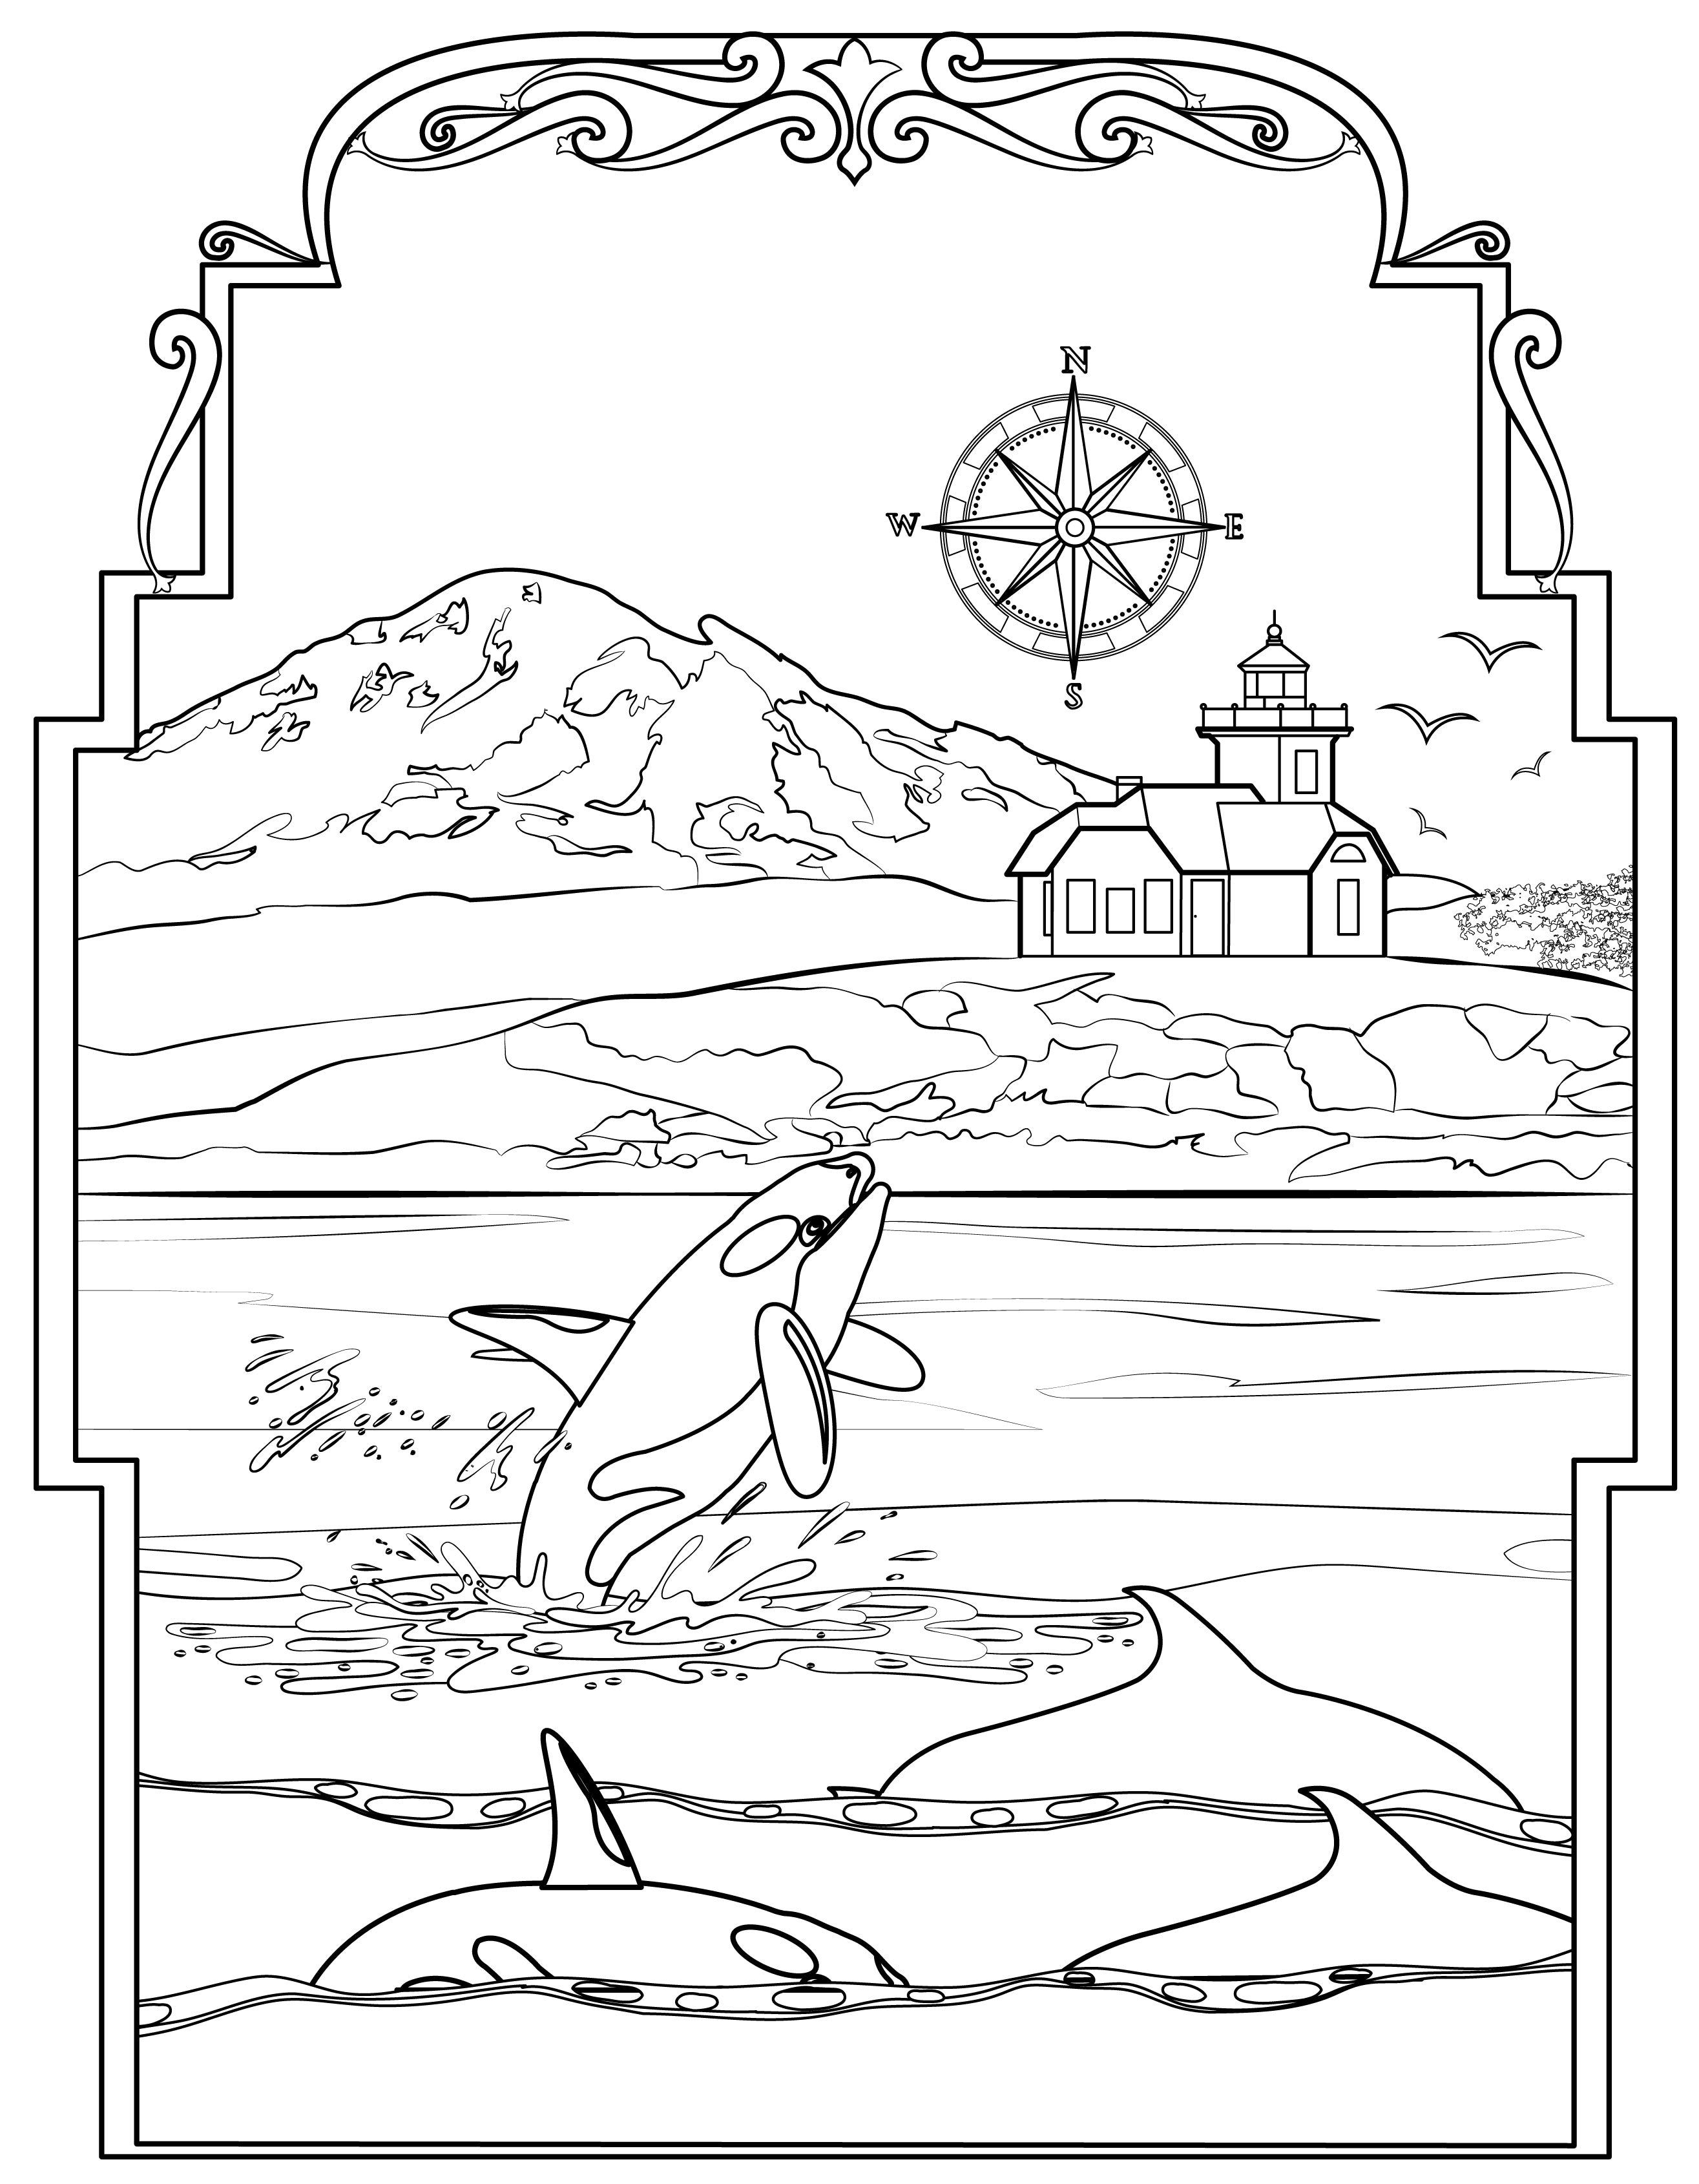 Single Coloring Book Page - Patos Island Lighthouse, Washington - Digital Print-from-Home